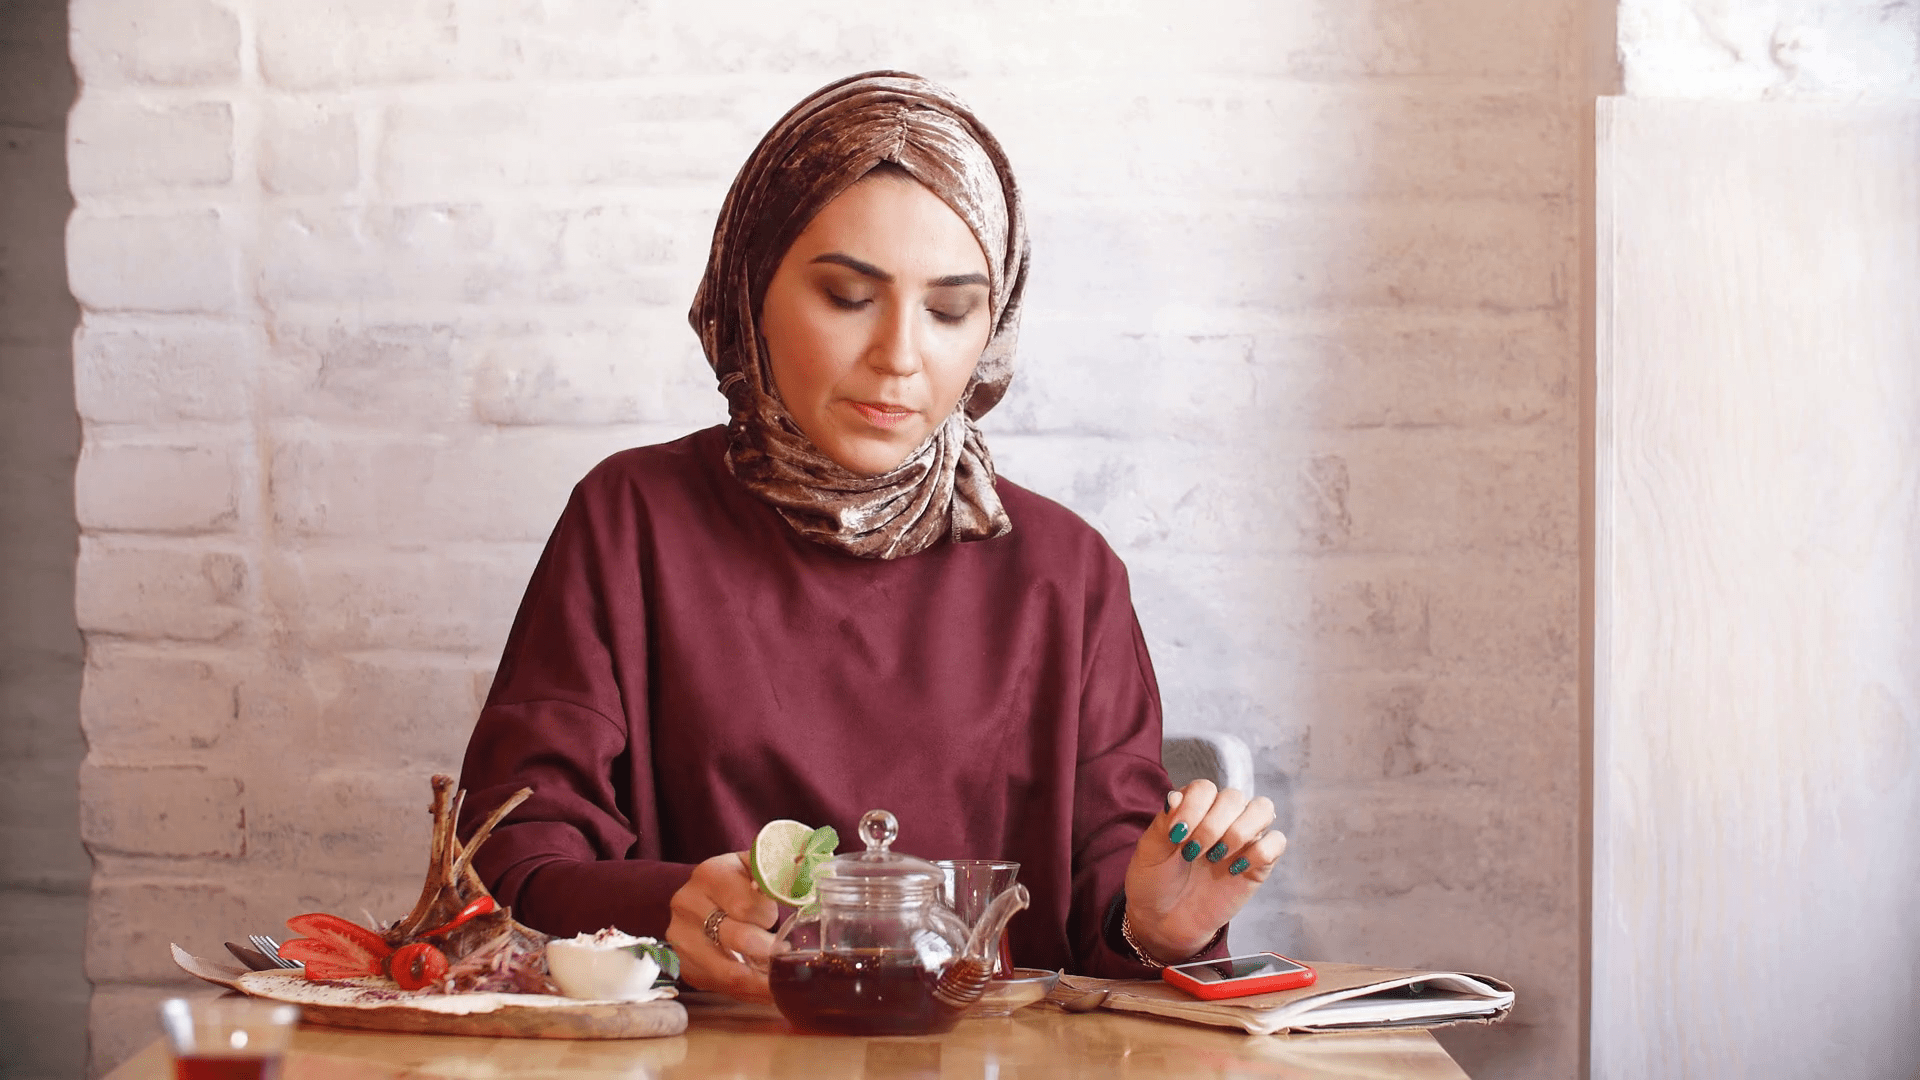 Does the Dietary Law in Islam Cause Hesitation for Non-Muslims to Revert?